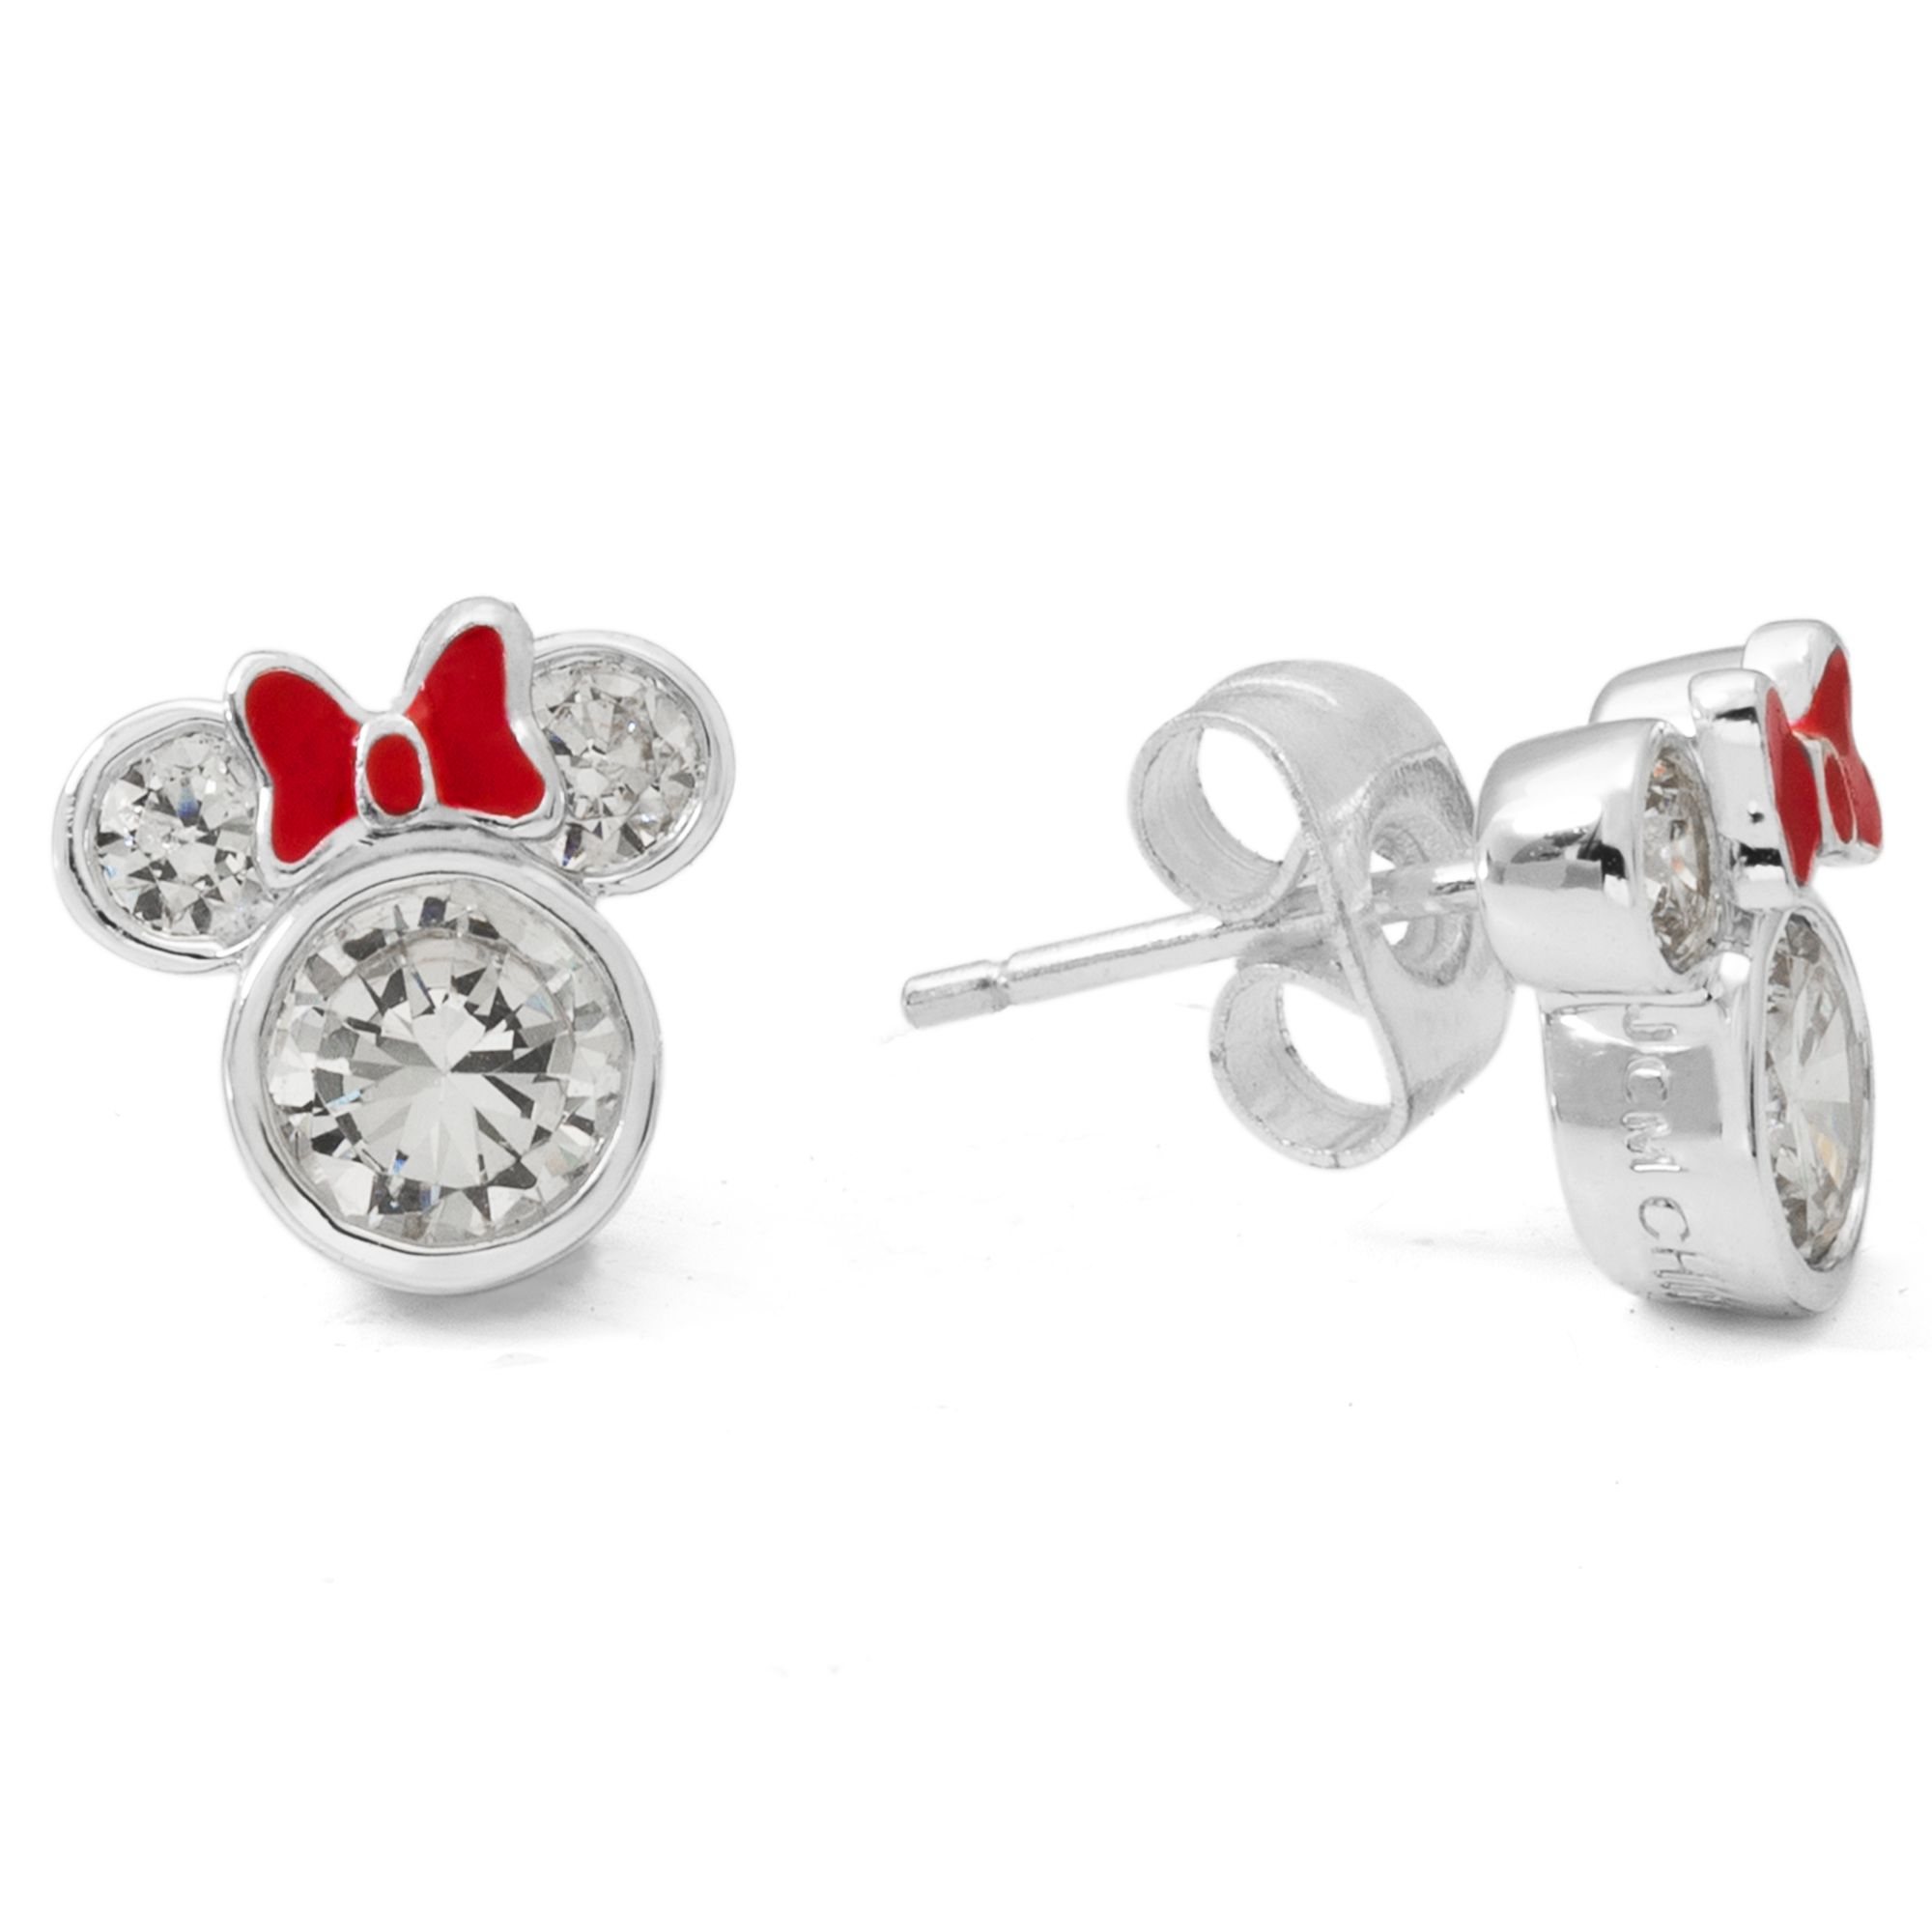 Disney Silver Plated Minnie Mouse Crystal Stud Earrings